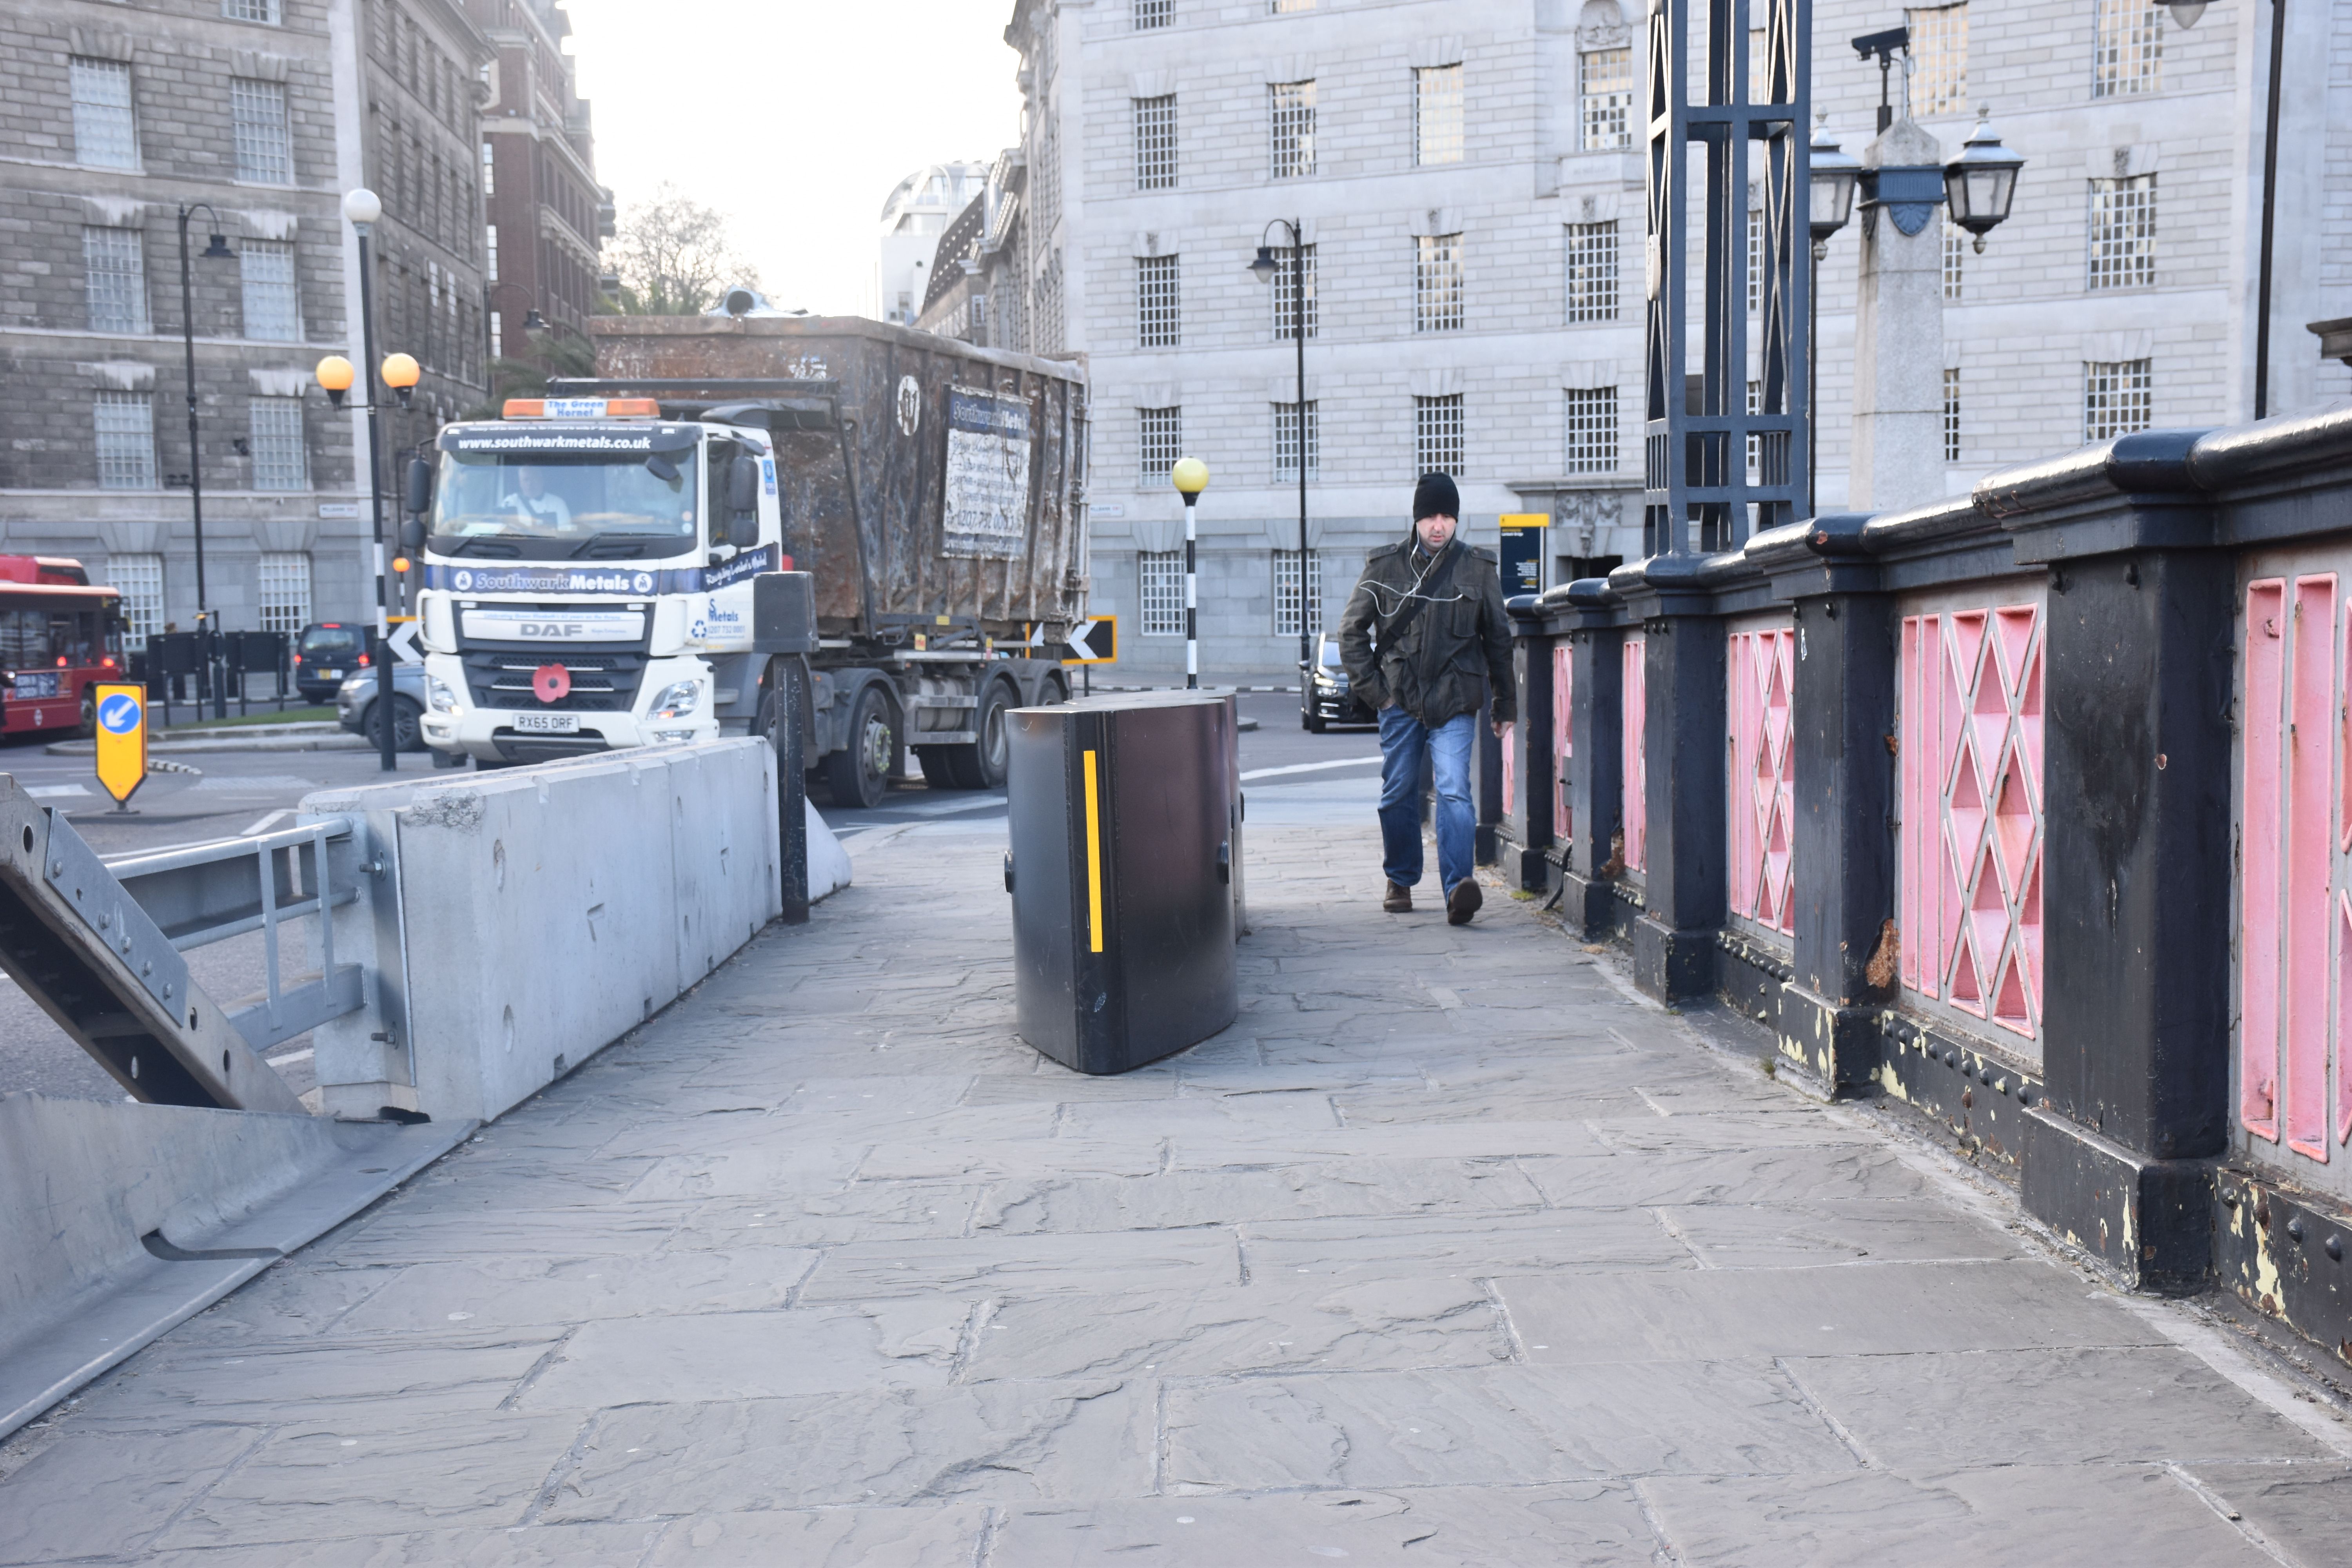 A man walks past a barricade on the Lambeth Bridge meant to stop vehicles from driving on the sidewalk. Image by Paul LeBlanc. United Kingdom, 2018.